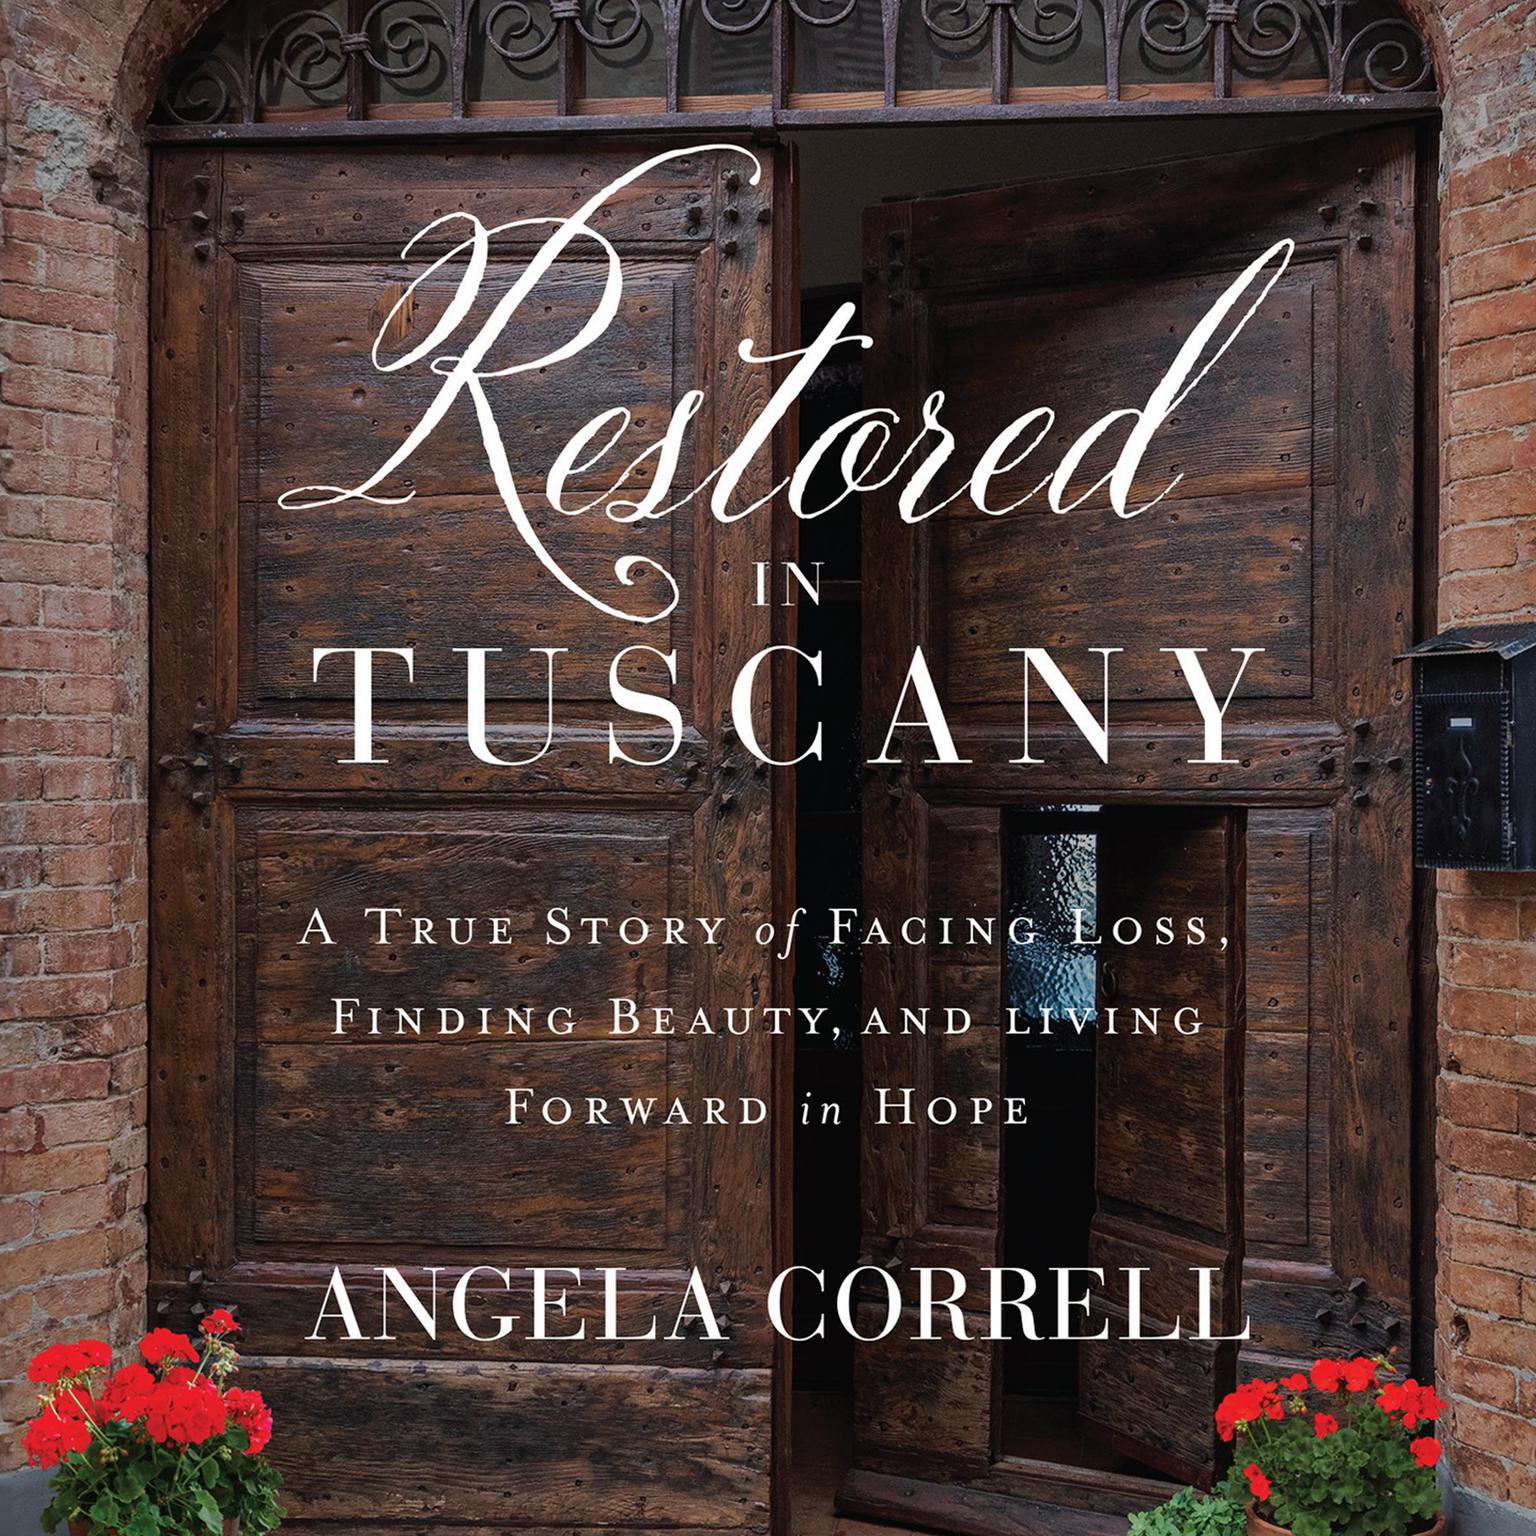 Restored in Tuscany: A True Story of Facing Loss, Finding Beauty, and Living Forward in Hope Audiobook, by Angela Correll